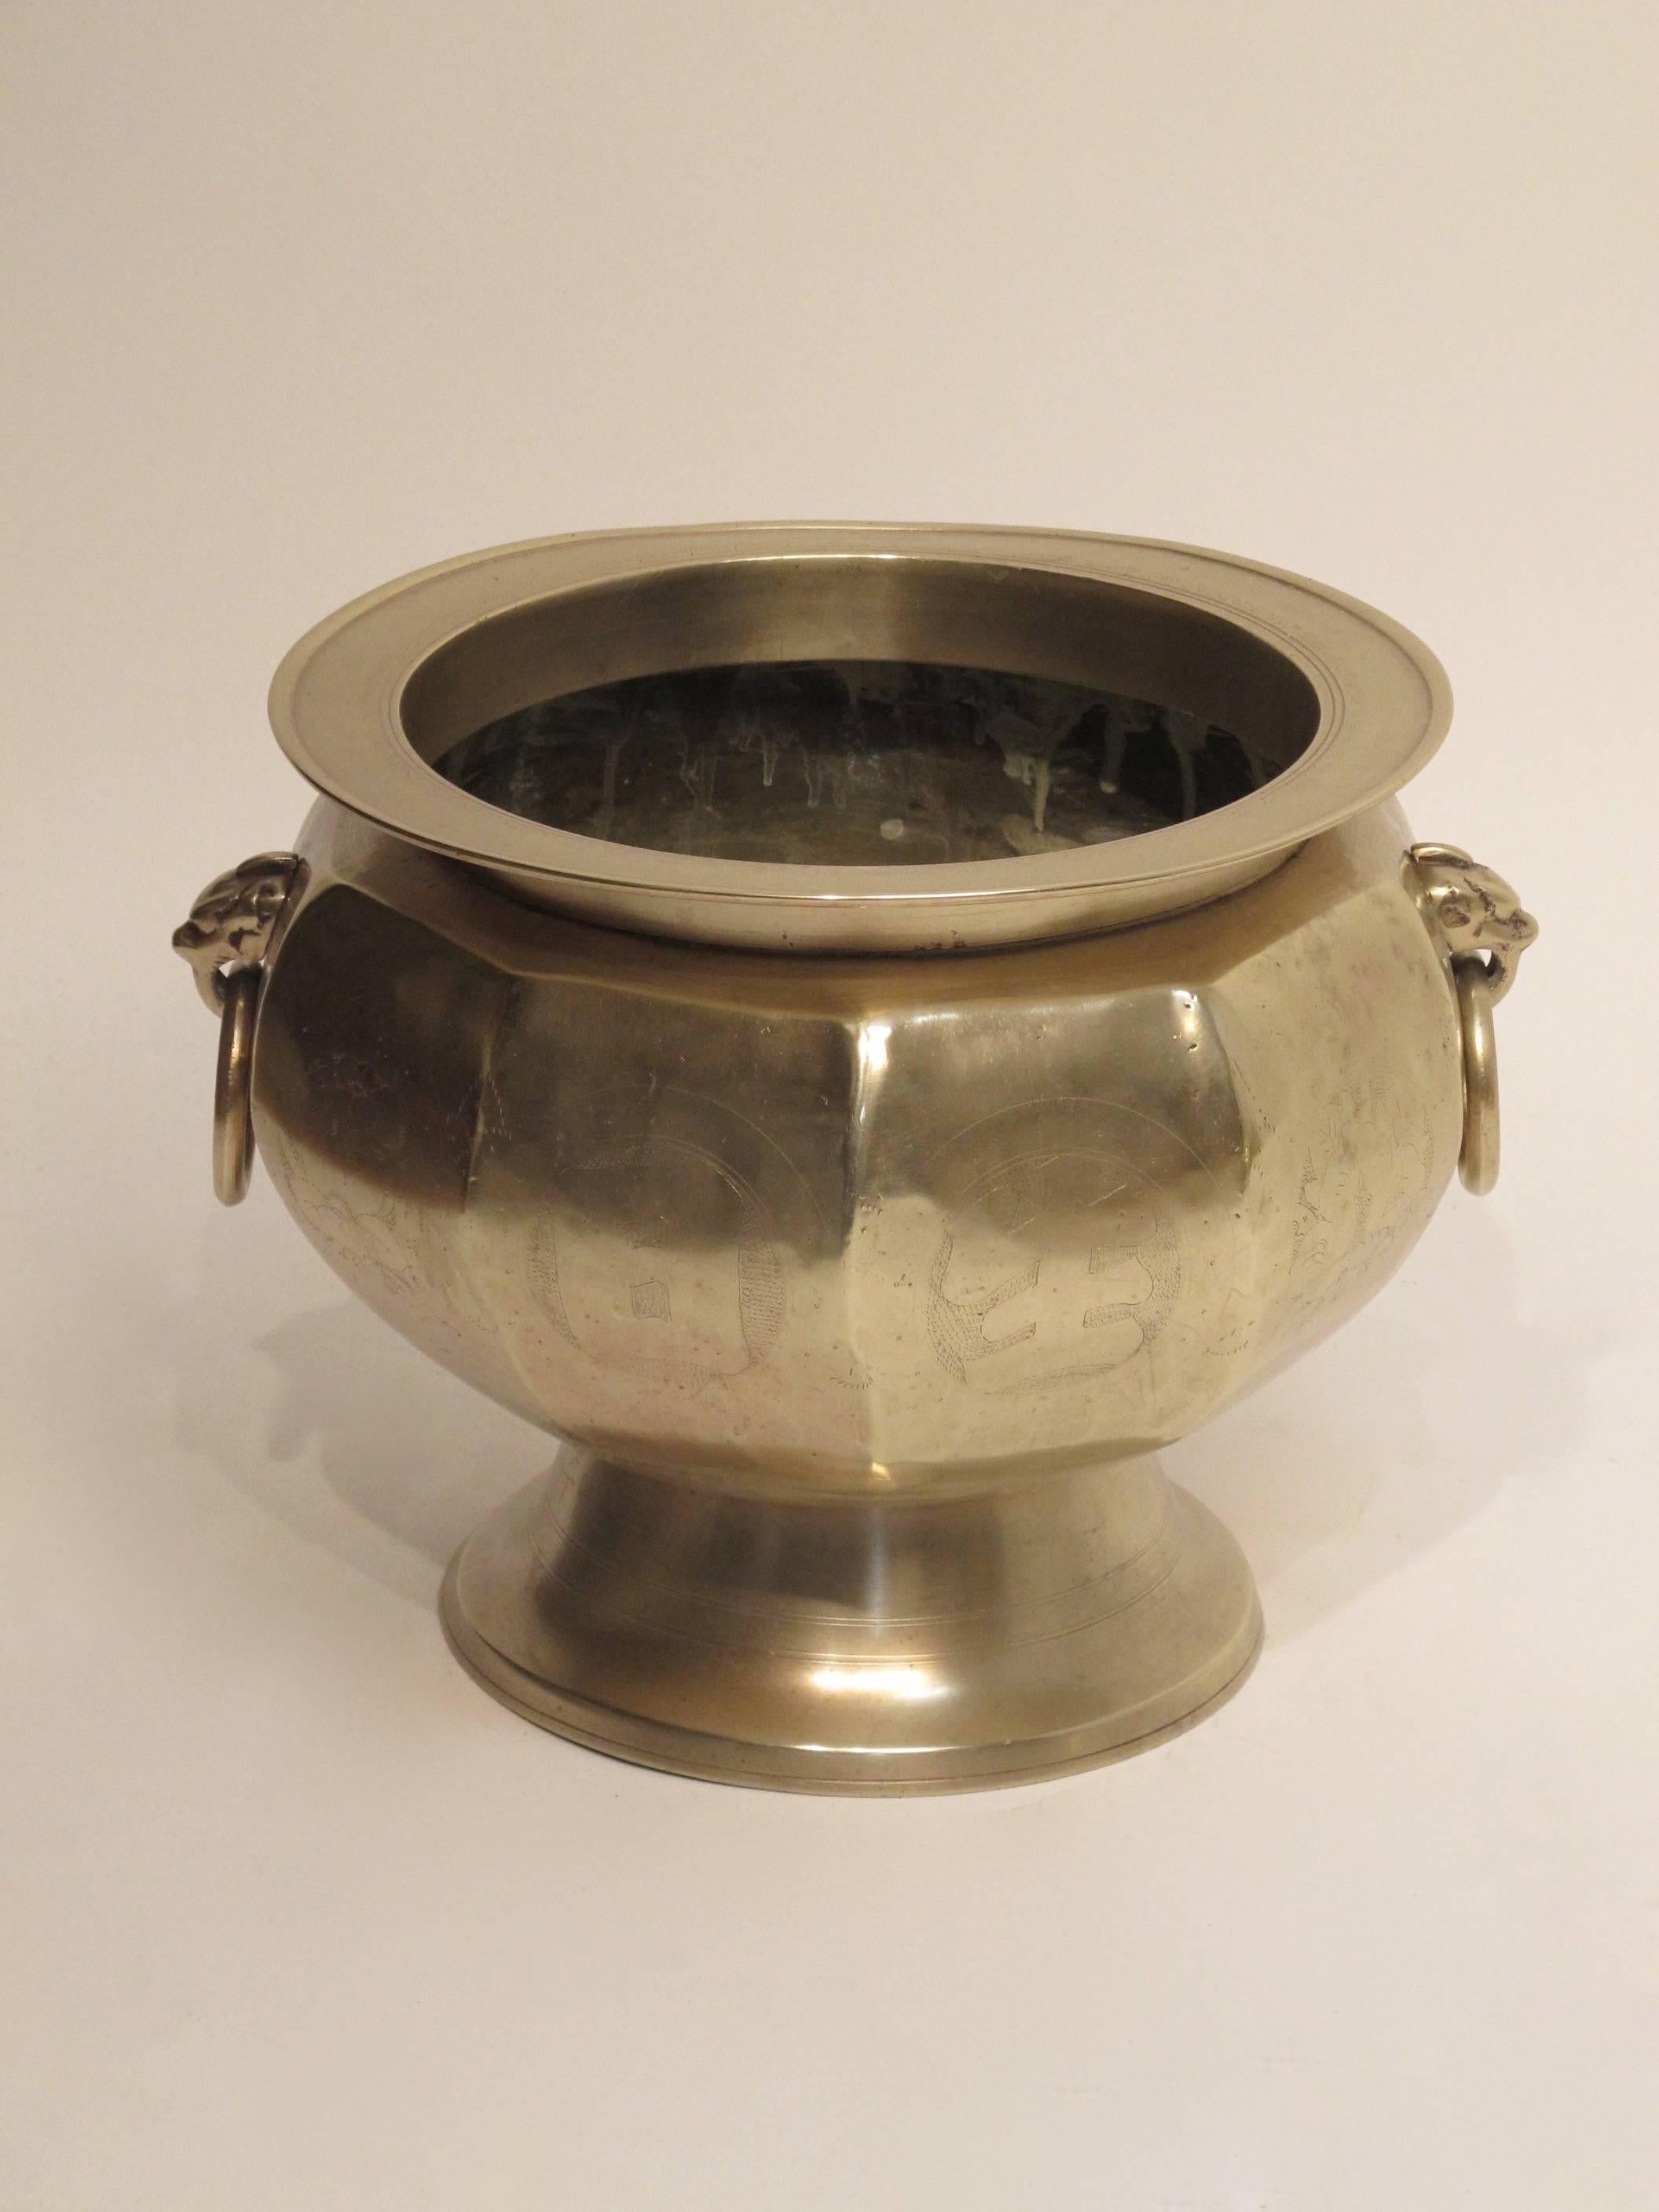 A heavy bronze brazier or footed pot with etched design around the body and base. Recently polished, early to mid-19th century.